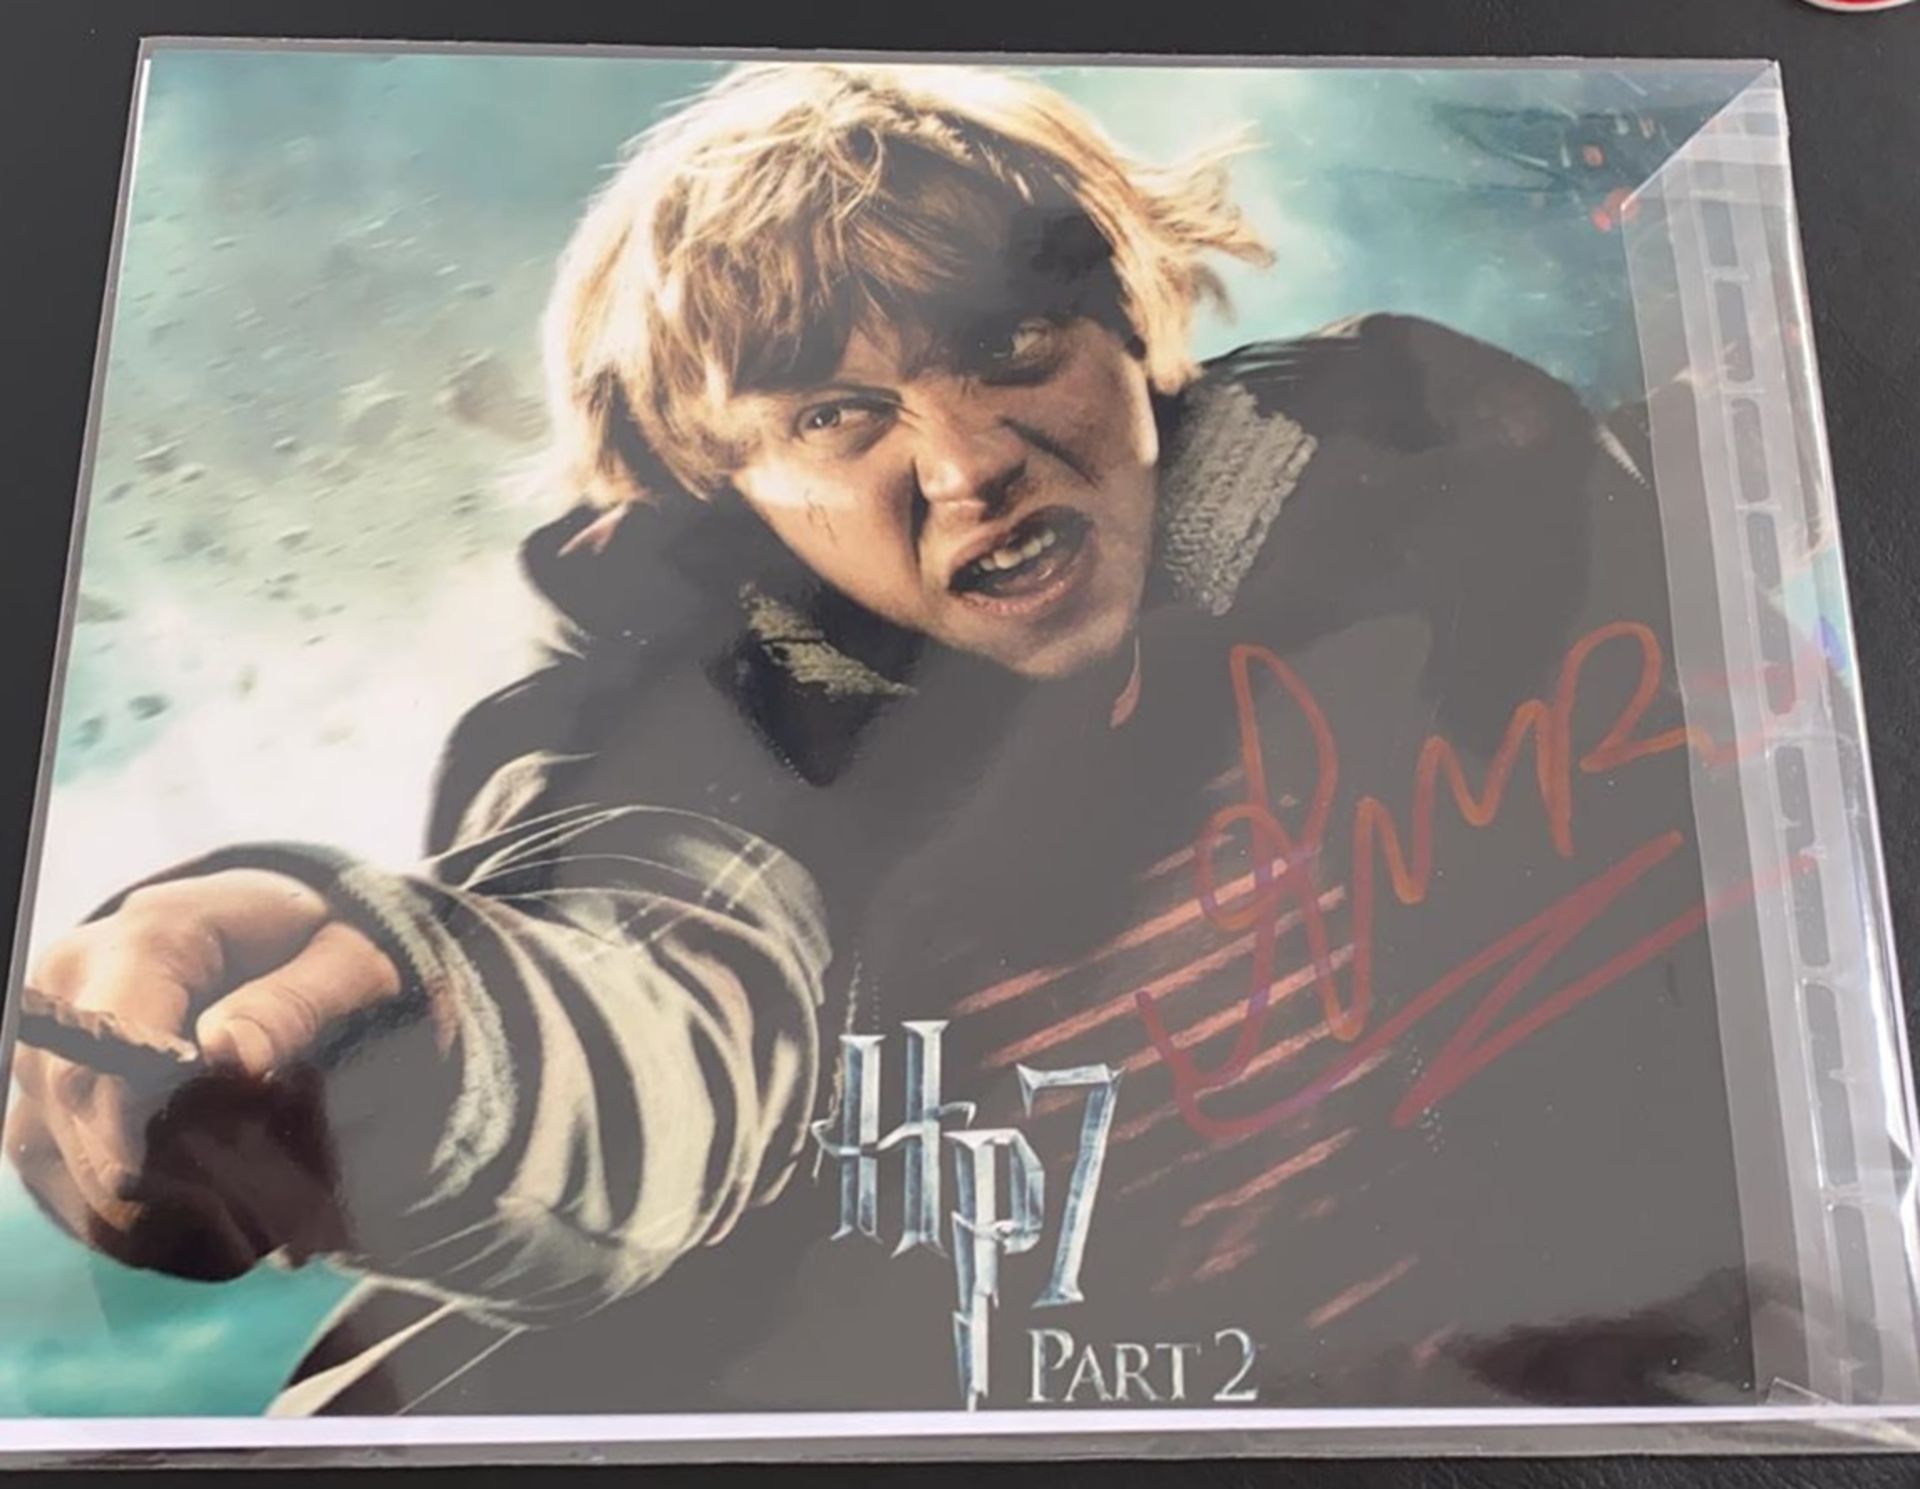 1 x Signed Autograph Picture - HARRY POTTER RUPERT GRINT - With COA - Size 12 x 8 Inch - CL590 - - Image 3 of 3